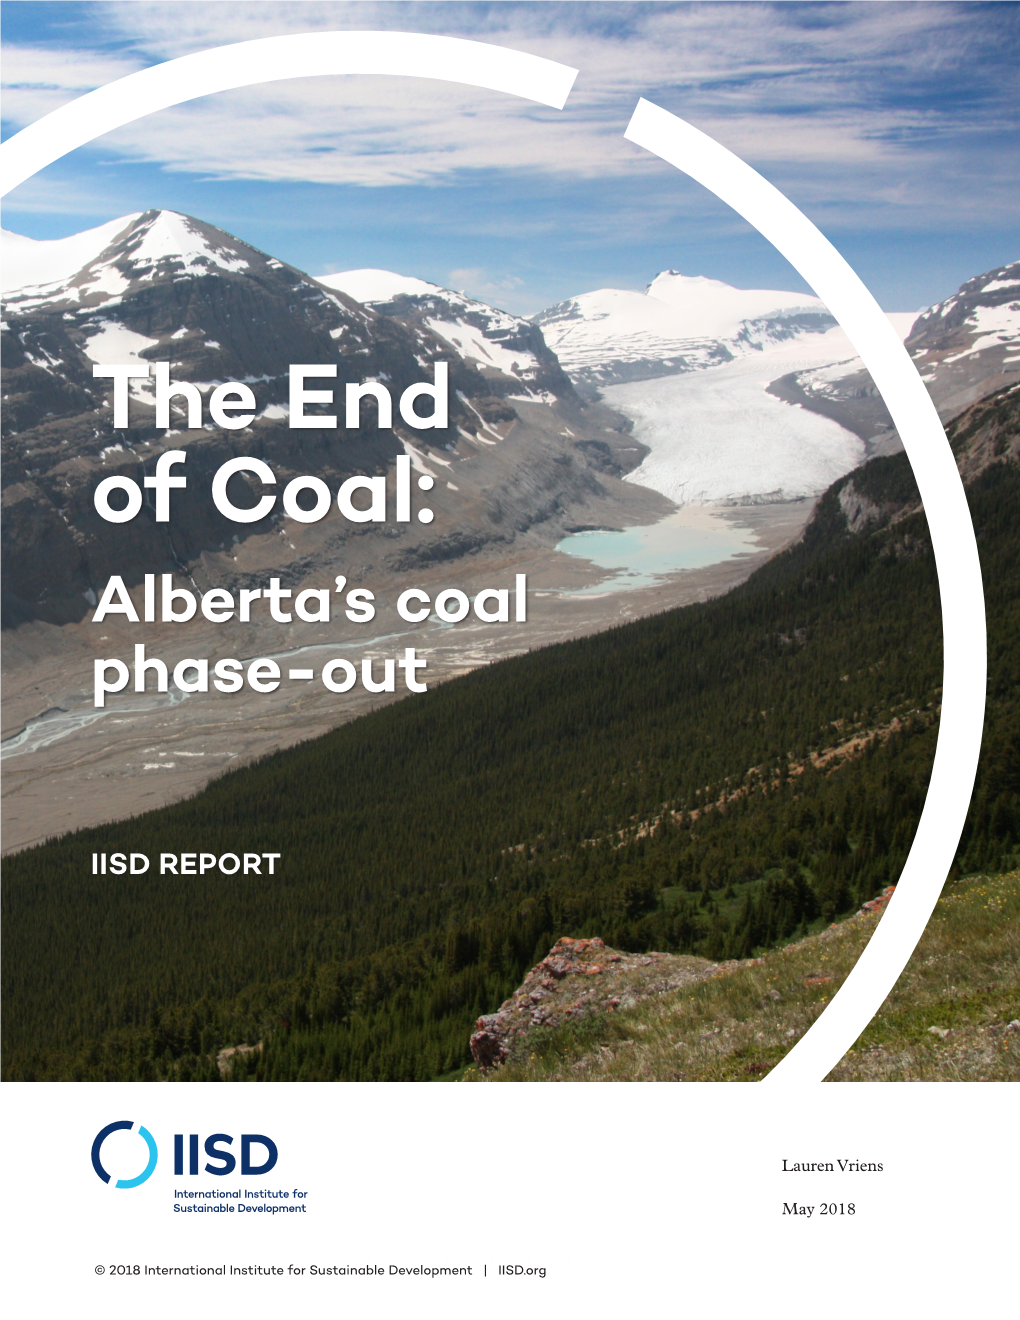 The End of Coal: Alberta's Coal Phase-Out